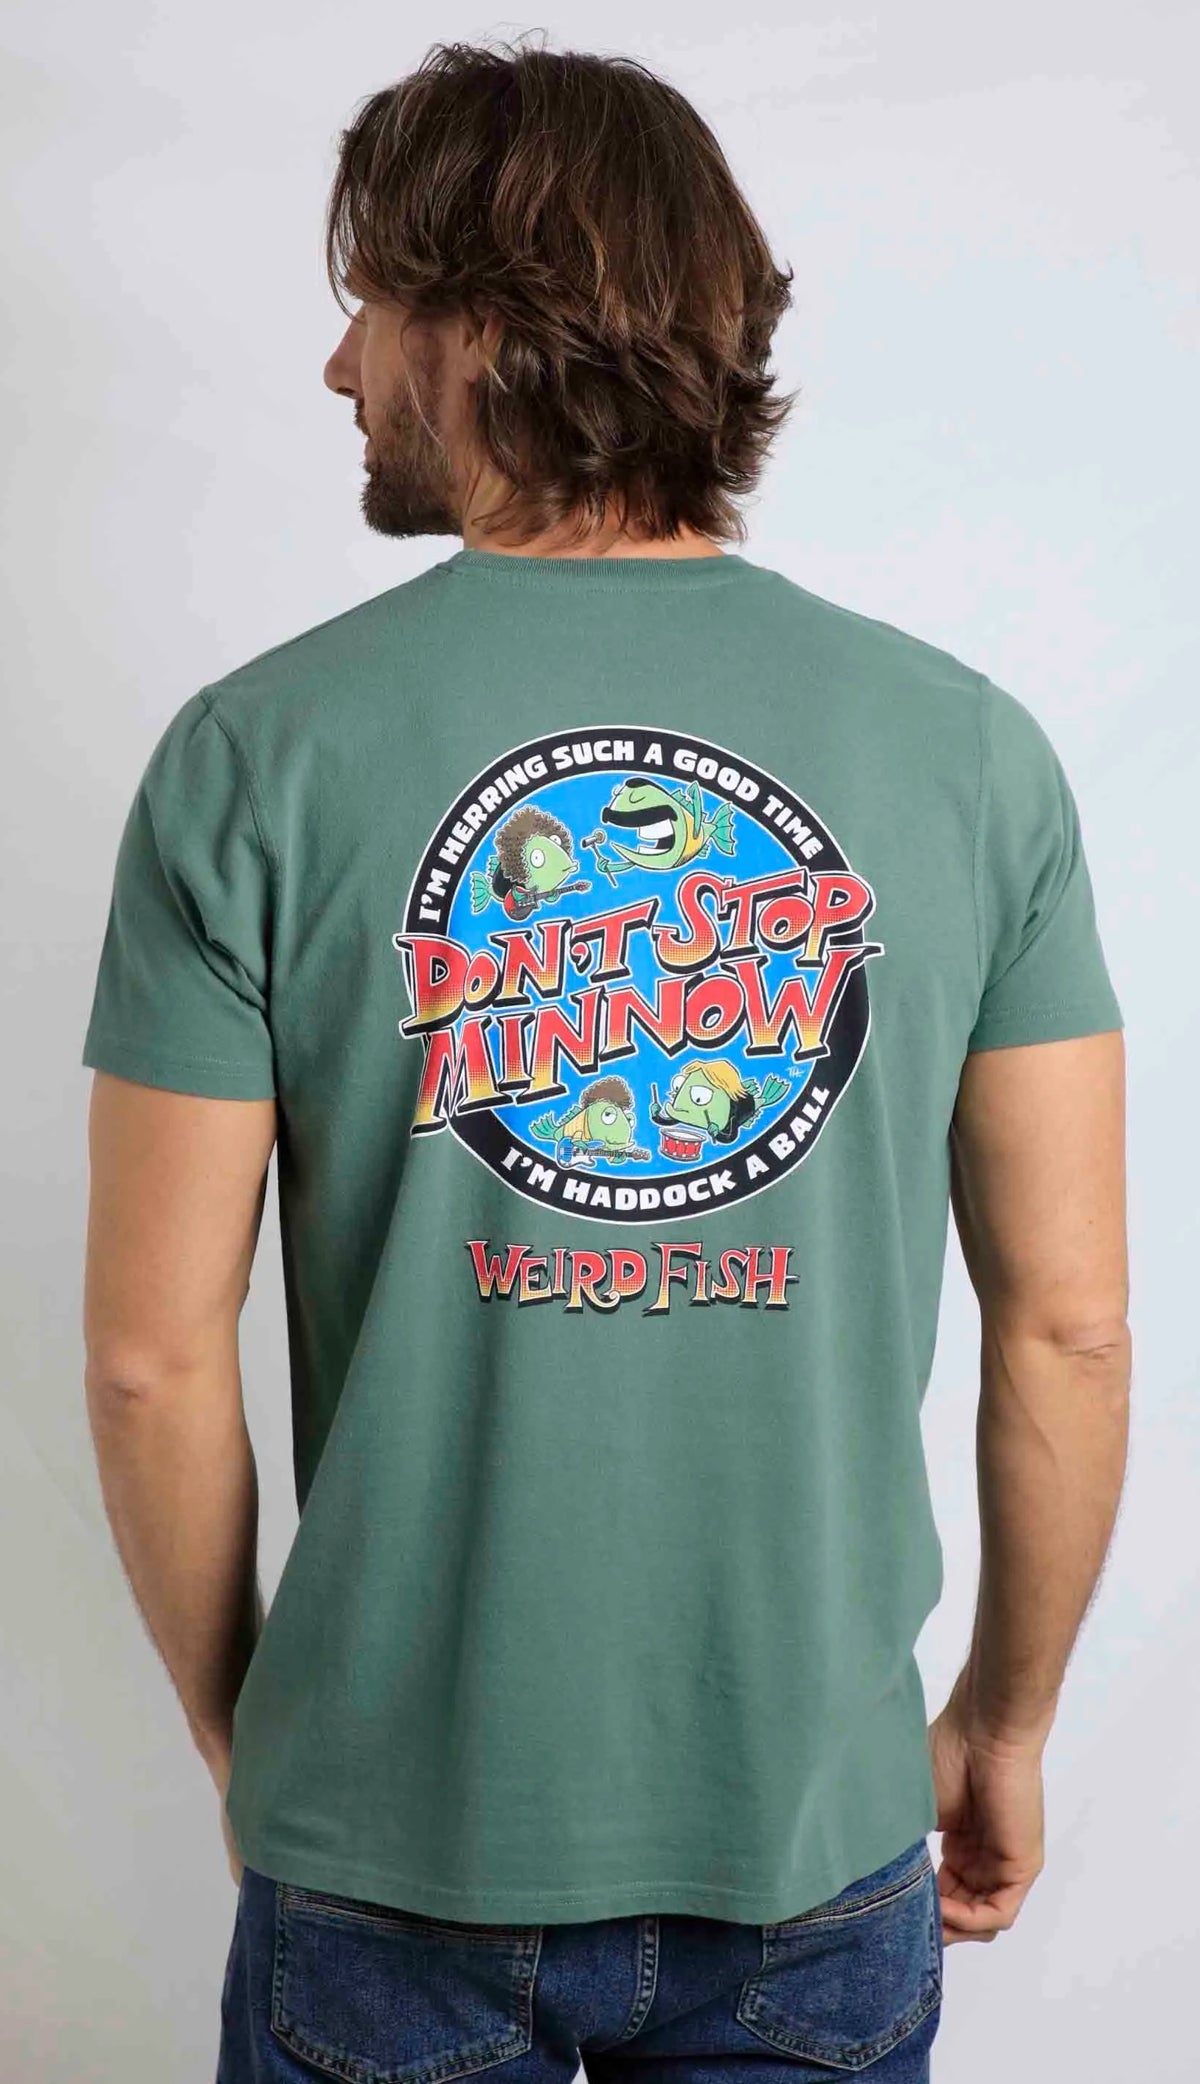 Men's Stop Minnow printed short sleeve tee from Weird Fish in Dusky Green, a parody of the Queen song Don't Stop Me Now.